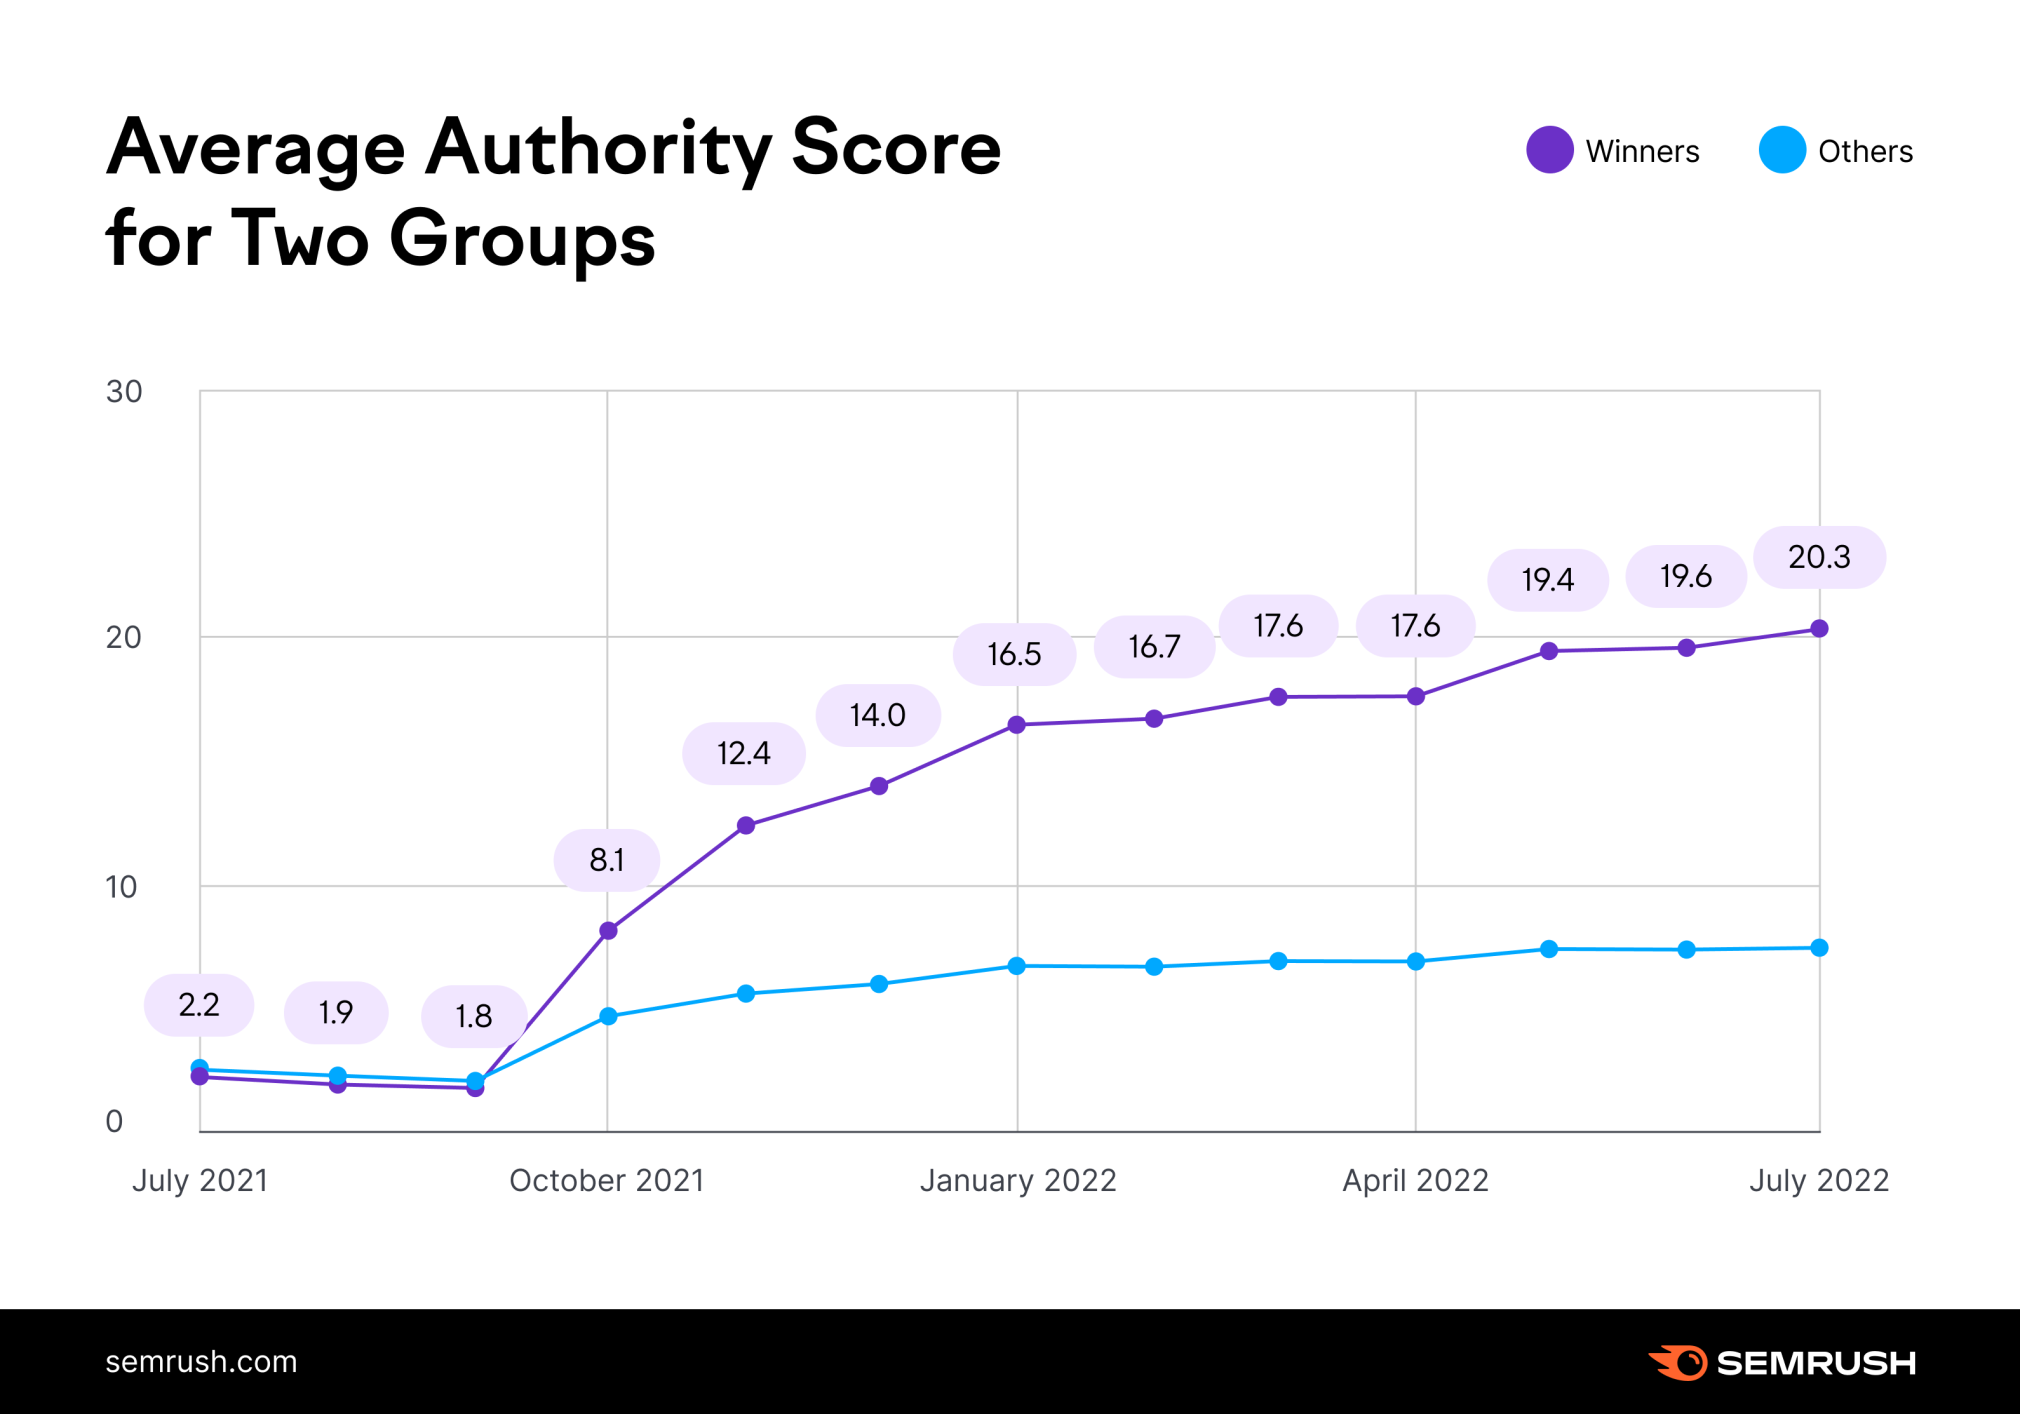 A Semrush study shows a graph comparing the average domain authority for two groups of domains.